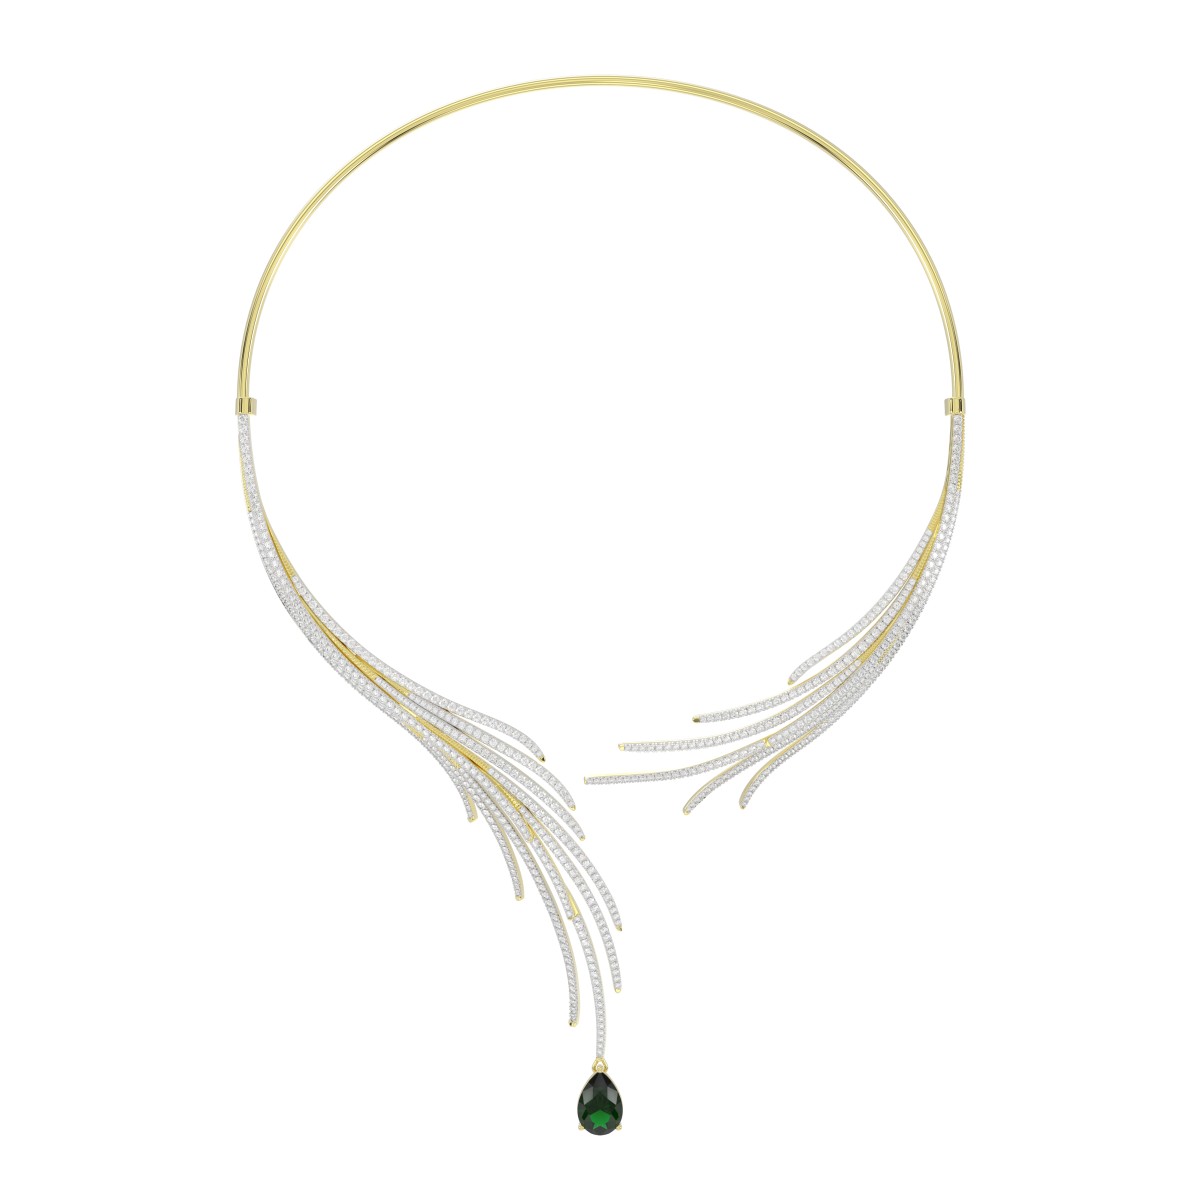 18K YELLOW GOLD 6CT ROUND/PEAR DIAMOND LADIES NECKLACE (CENTER STONE EMERALD/PEAR 4 1/6CT)